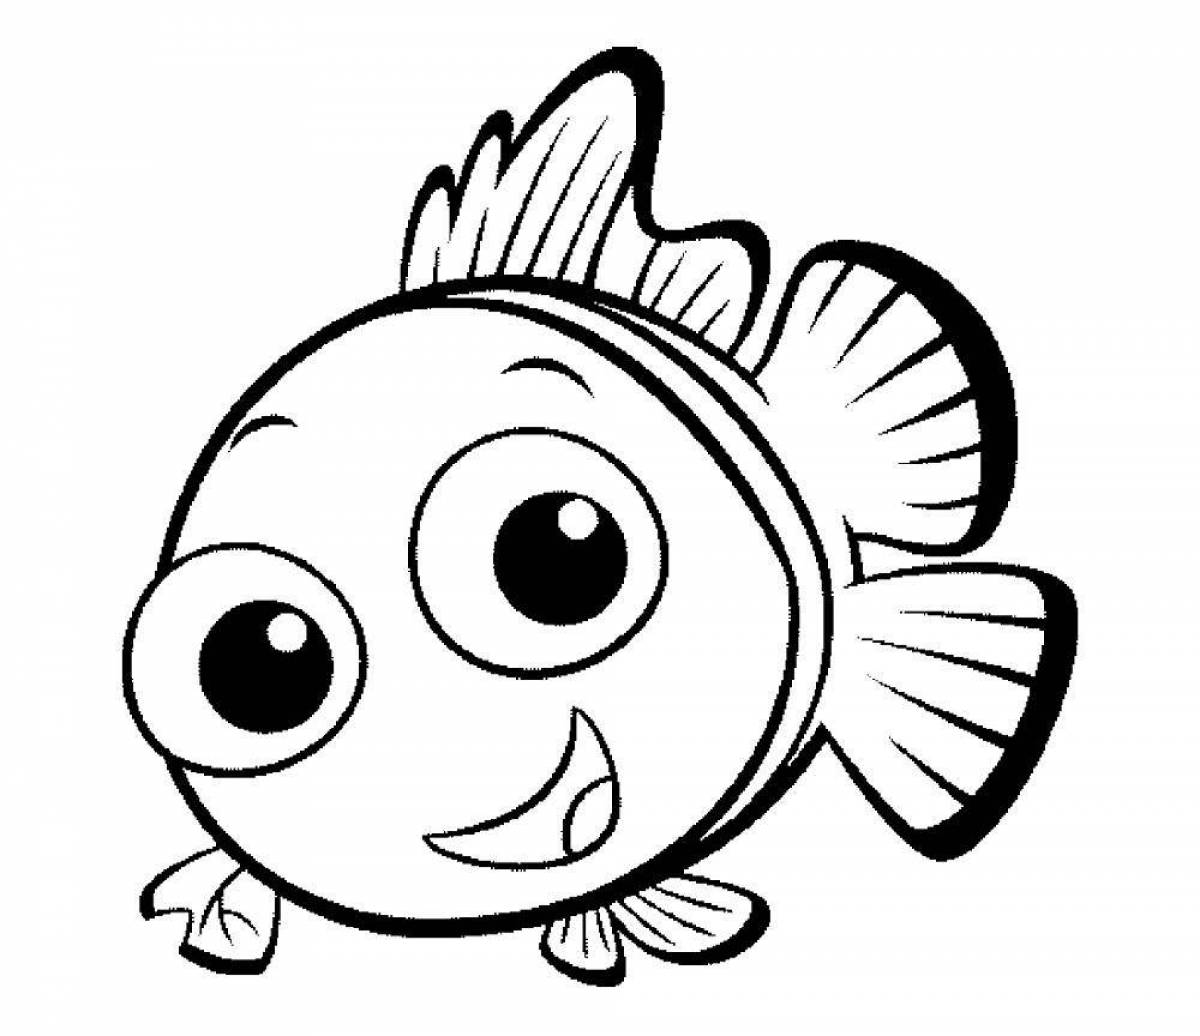 Colorful fish coloring page for 2-3 year olds